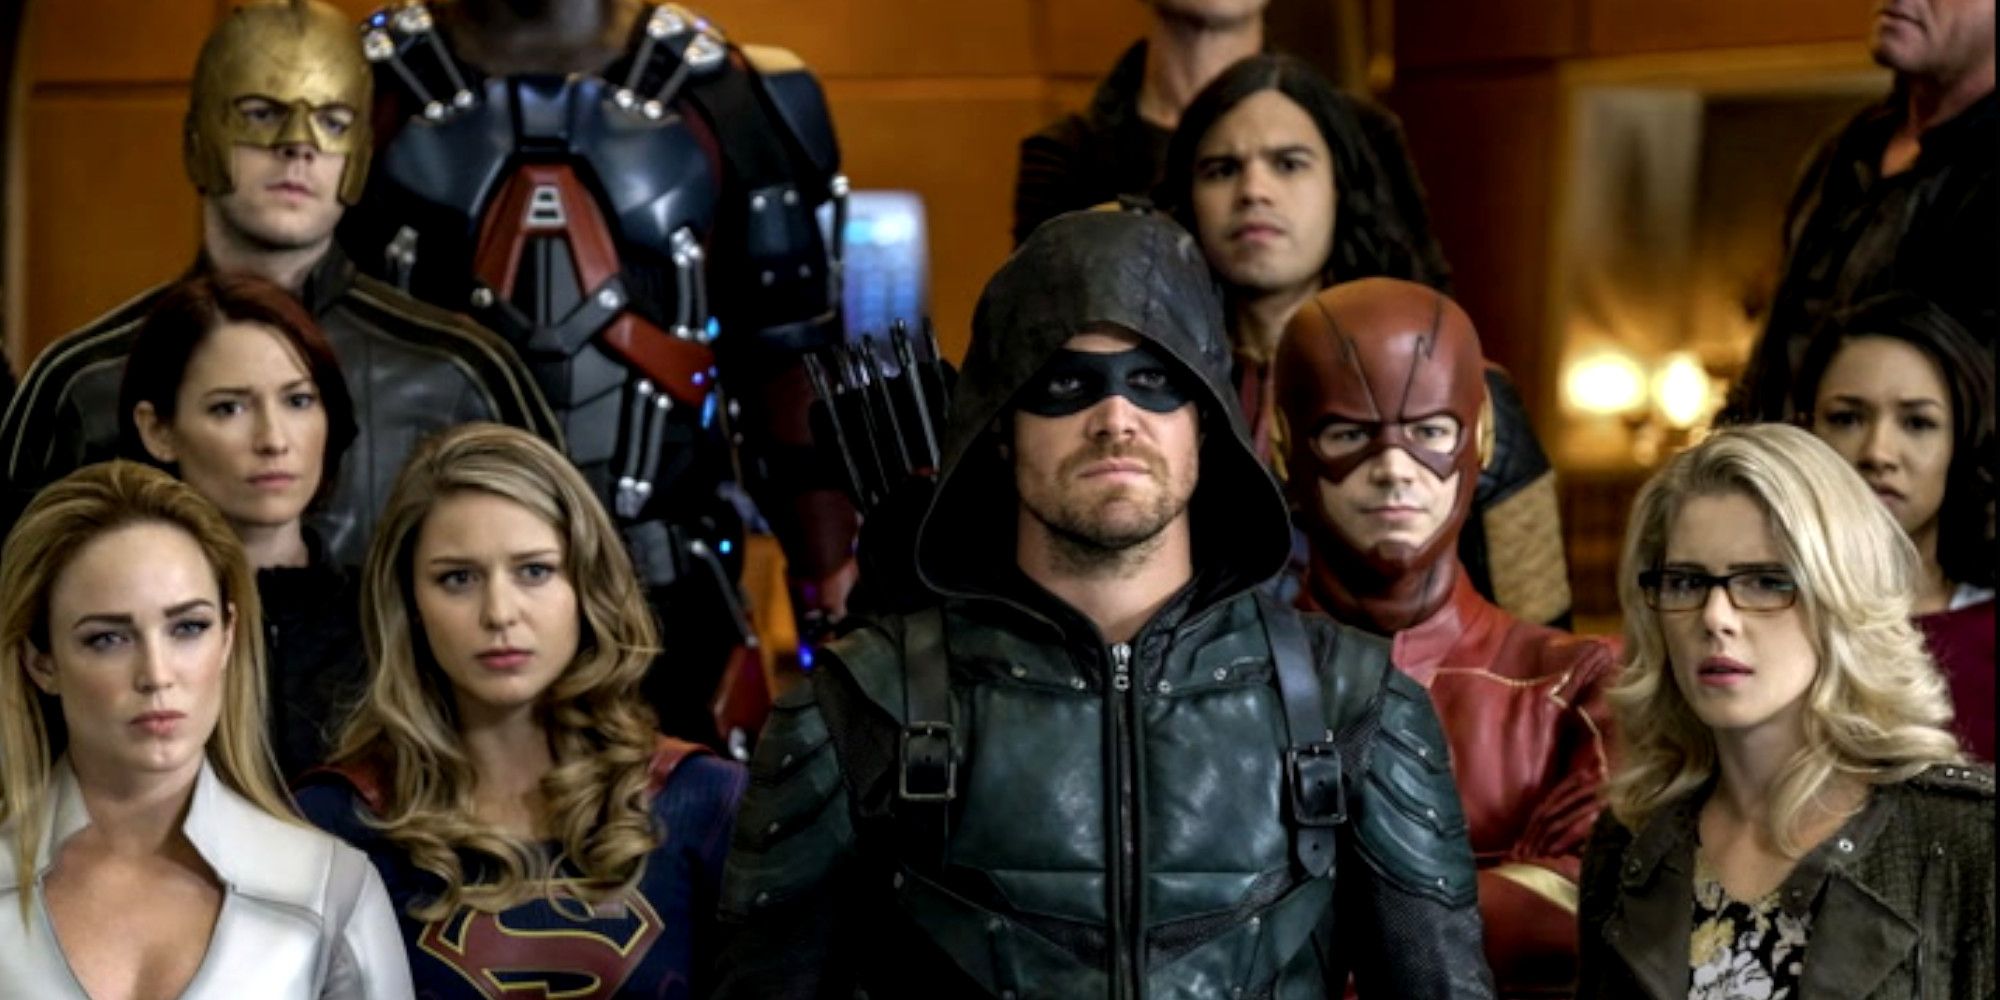 Legends of Tomorrow Crisis on Earth-X: Part 4 (Season 3) Crossover The Flash, The Arrow, Supergirl